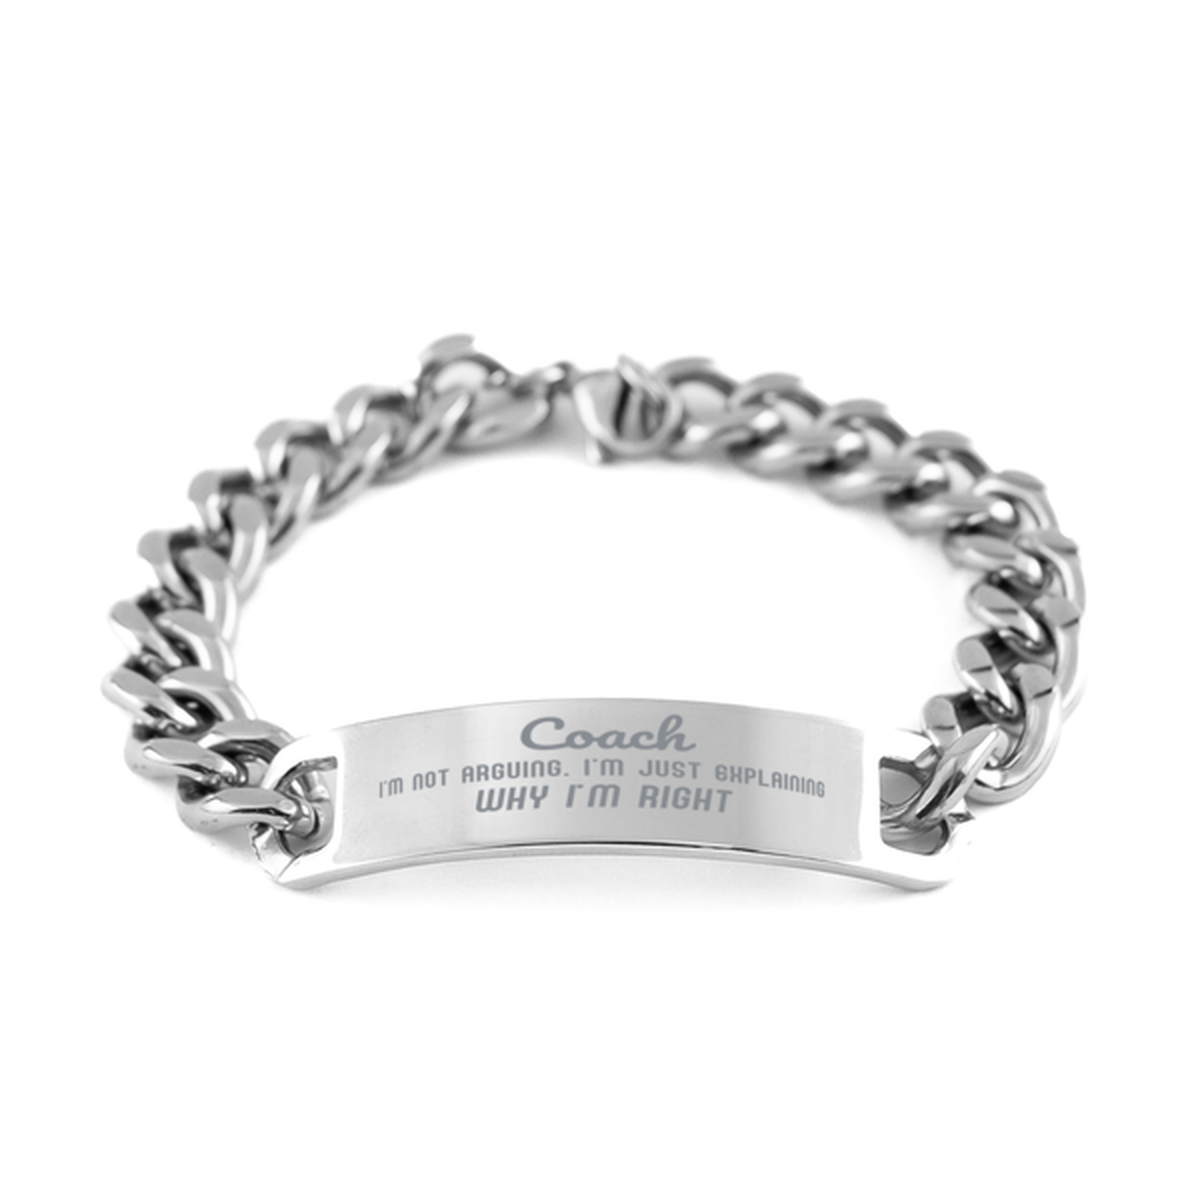 Coach I'm not Arguing. I'm Just Explaining Why I'm RIGHT Cuban Chain Stainless Steel Bracelet, Graduation Birthday Christmas Coach Gifts For Coach Funny Saying Quote Present for Men Women Coworker